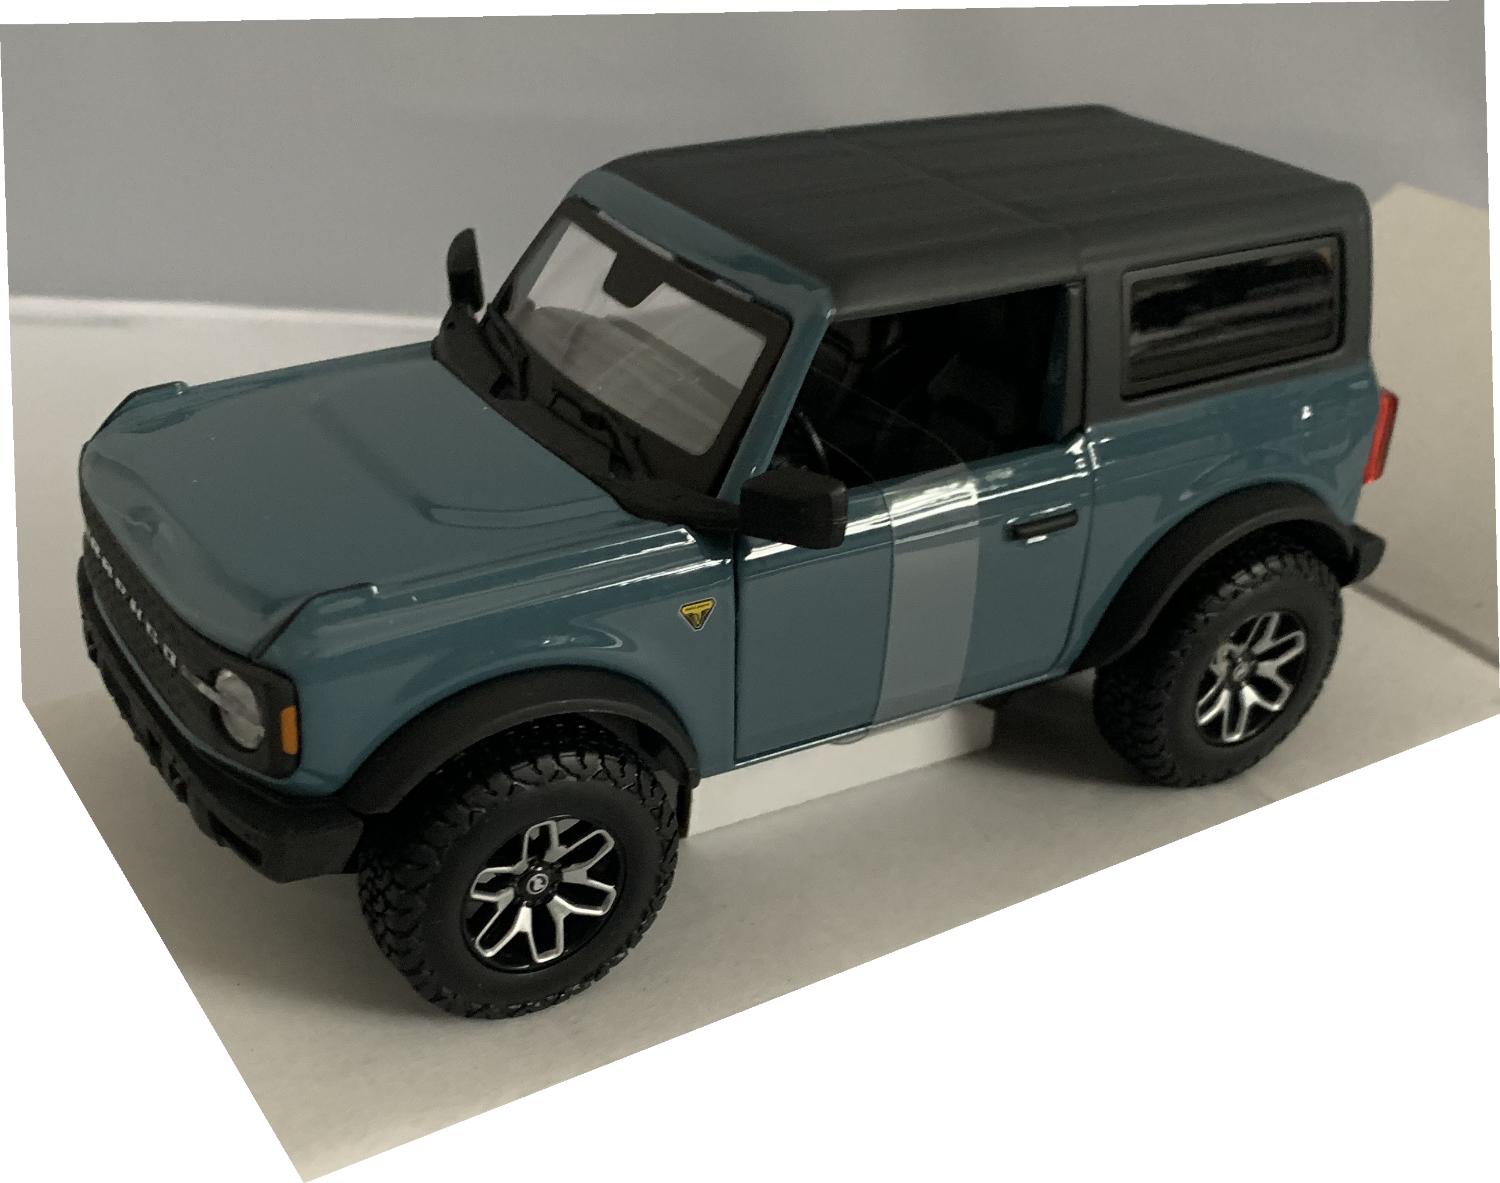 An excellent scale model of a Ford Bronco Badlands decorated in blue with black roof and silver and black wheels.